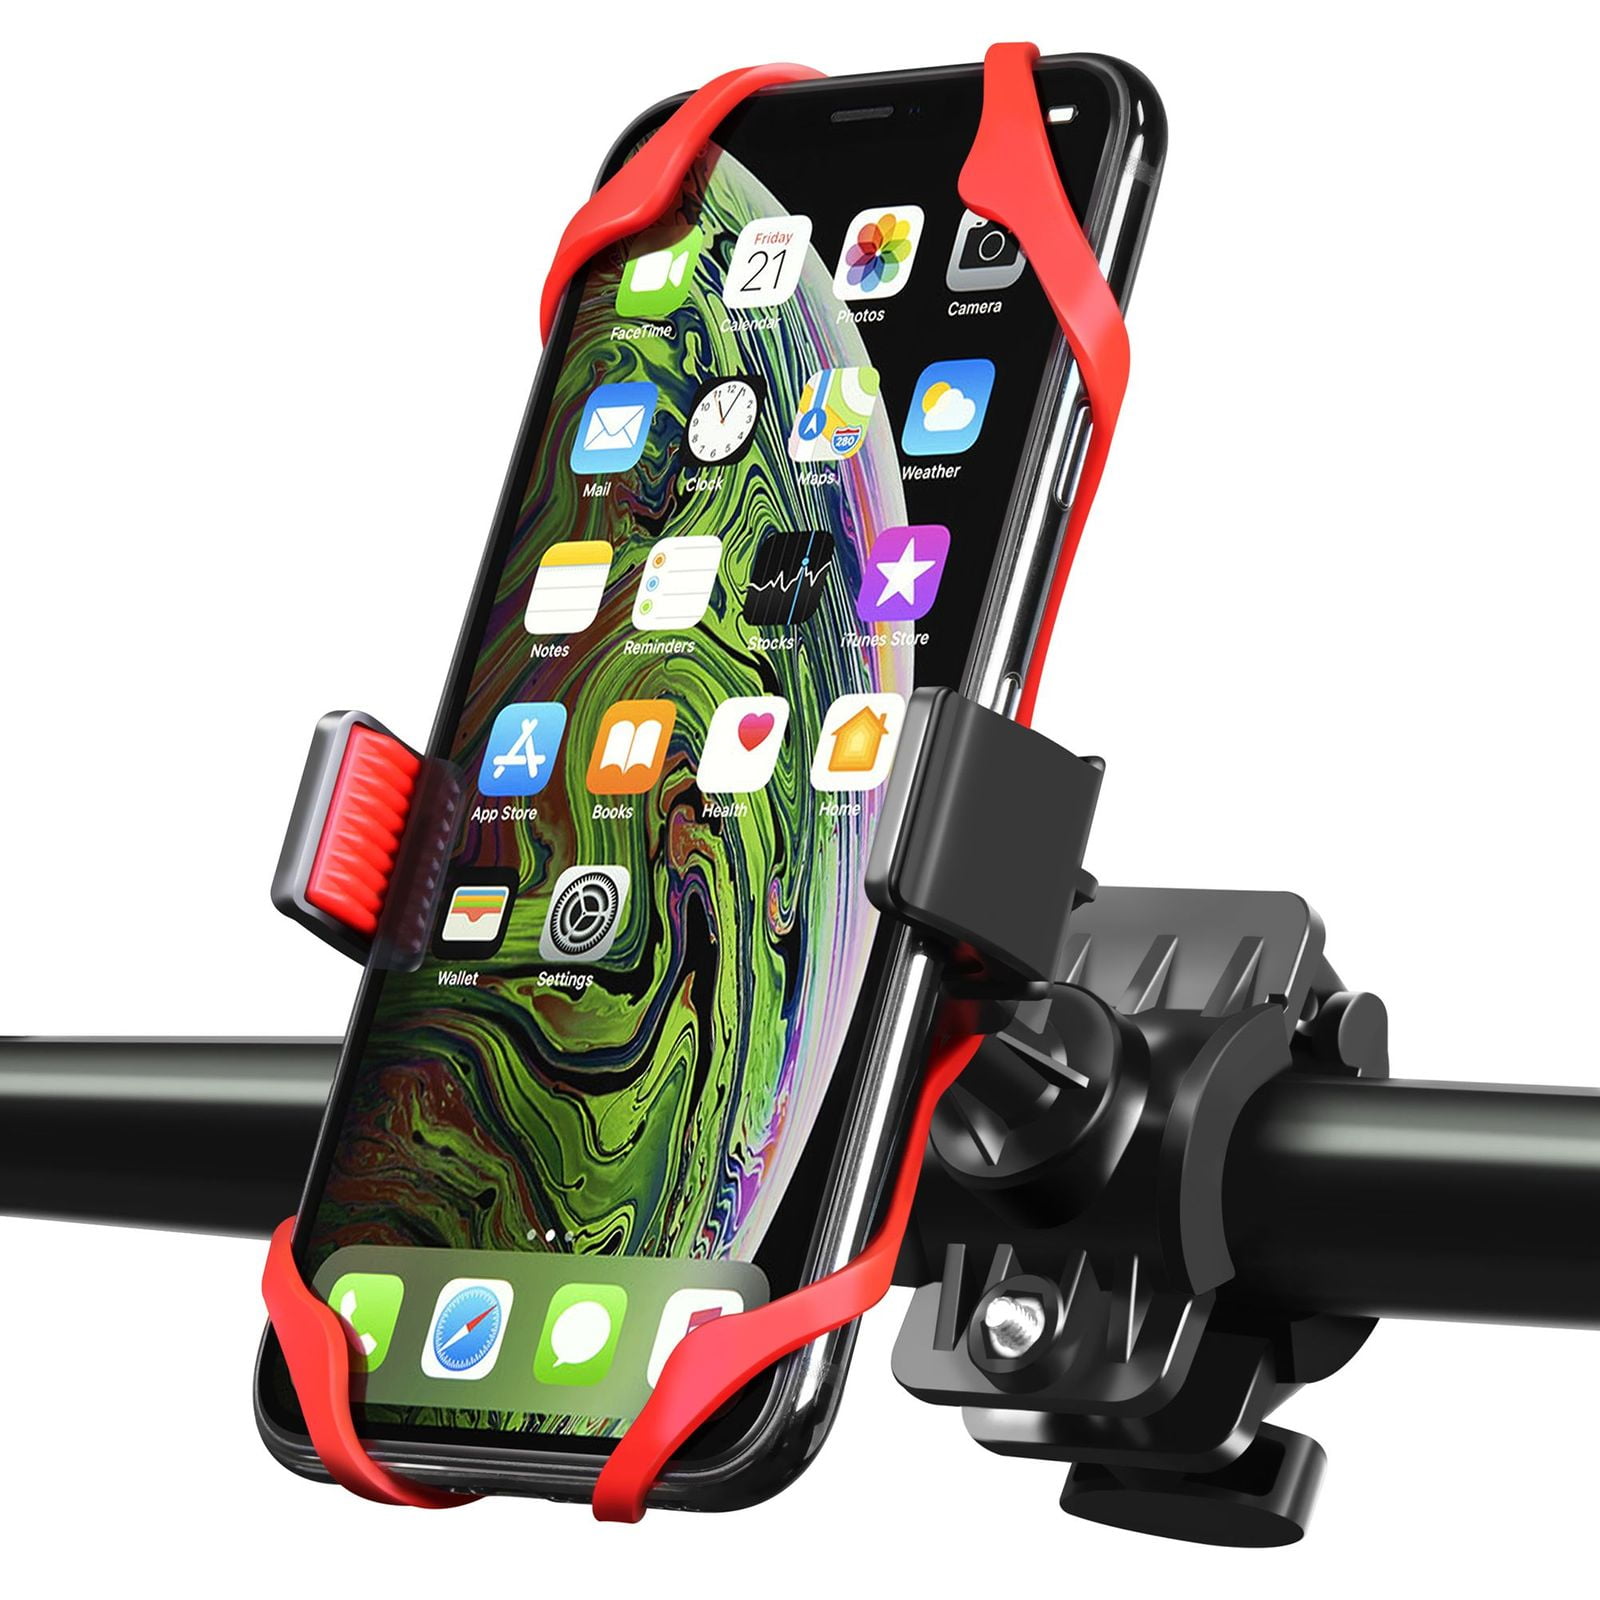 Cellet Adjustable Bicycle Handlebar Phone Holder Mount for Motorcycle/Bike Clamp Cradle Compatible With iPhone 11 Pro Max Xs Max Xr X 8 Note 10 9 8 Galaxy S10 S9 S8 J2 A6 A50 Pixel 4 3 XL LG K40 Stylo 